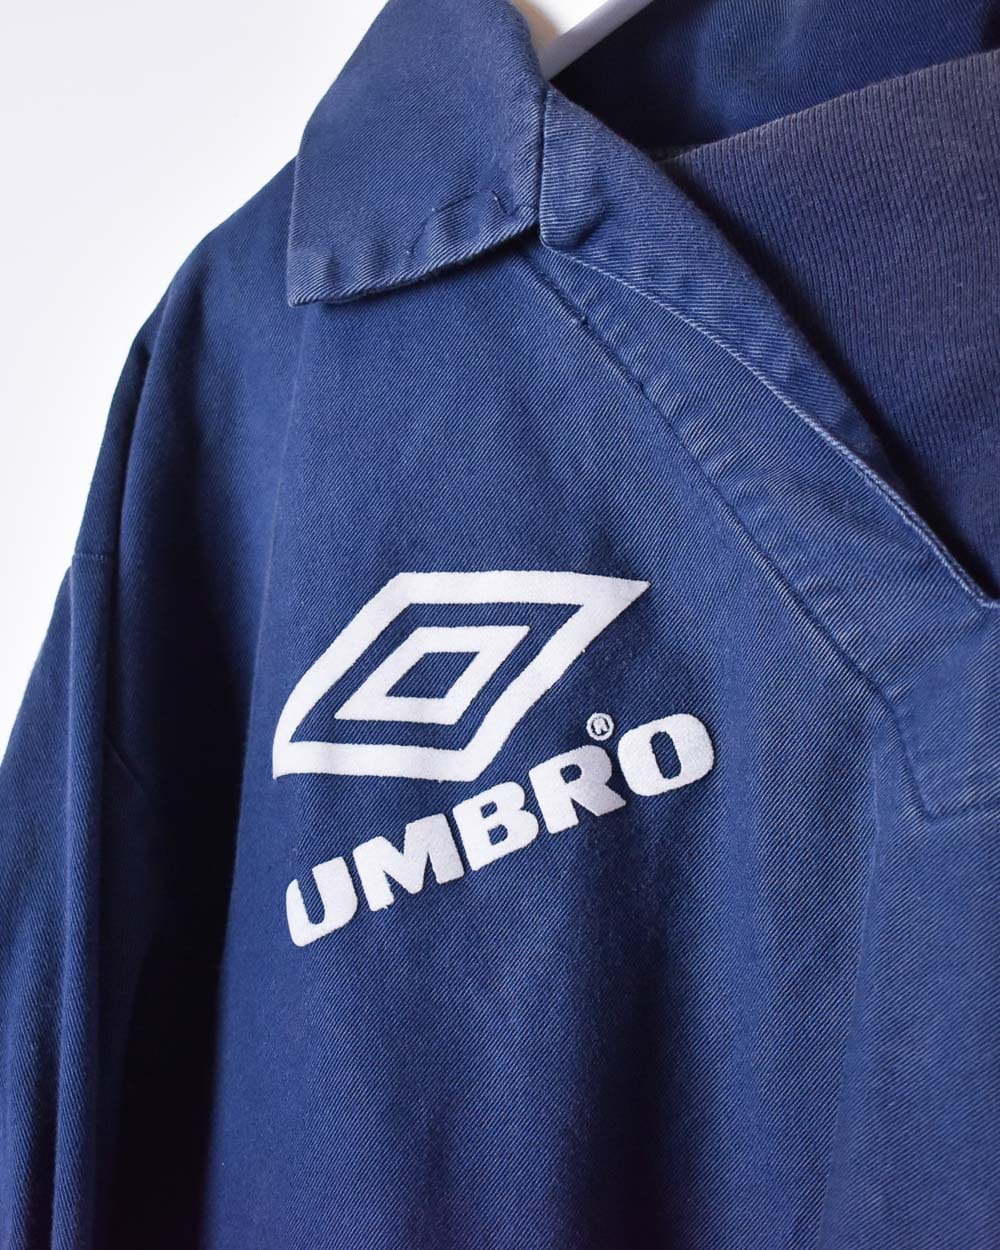 Navy Umbro Pullover Drill Jacket - Large